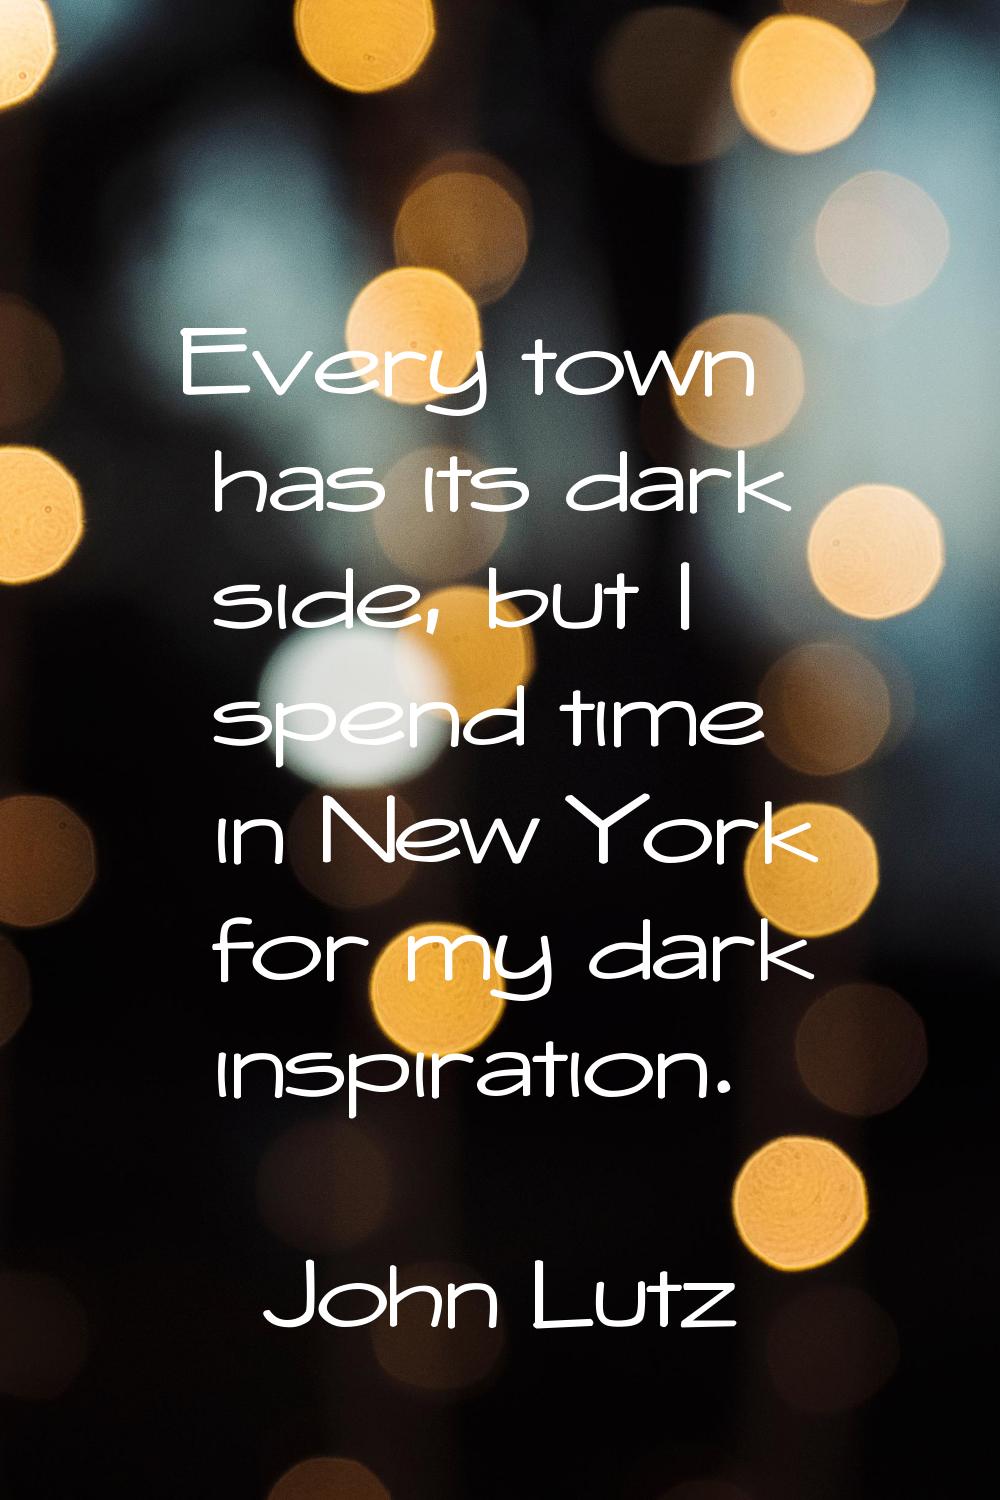 Every town has its dark side, but I spend time in New York for my dark inspiration.